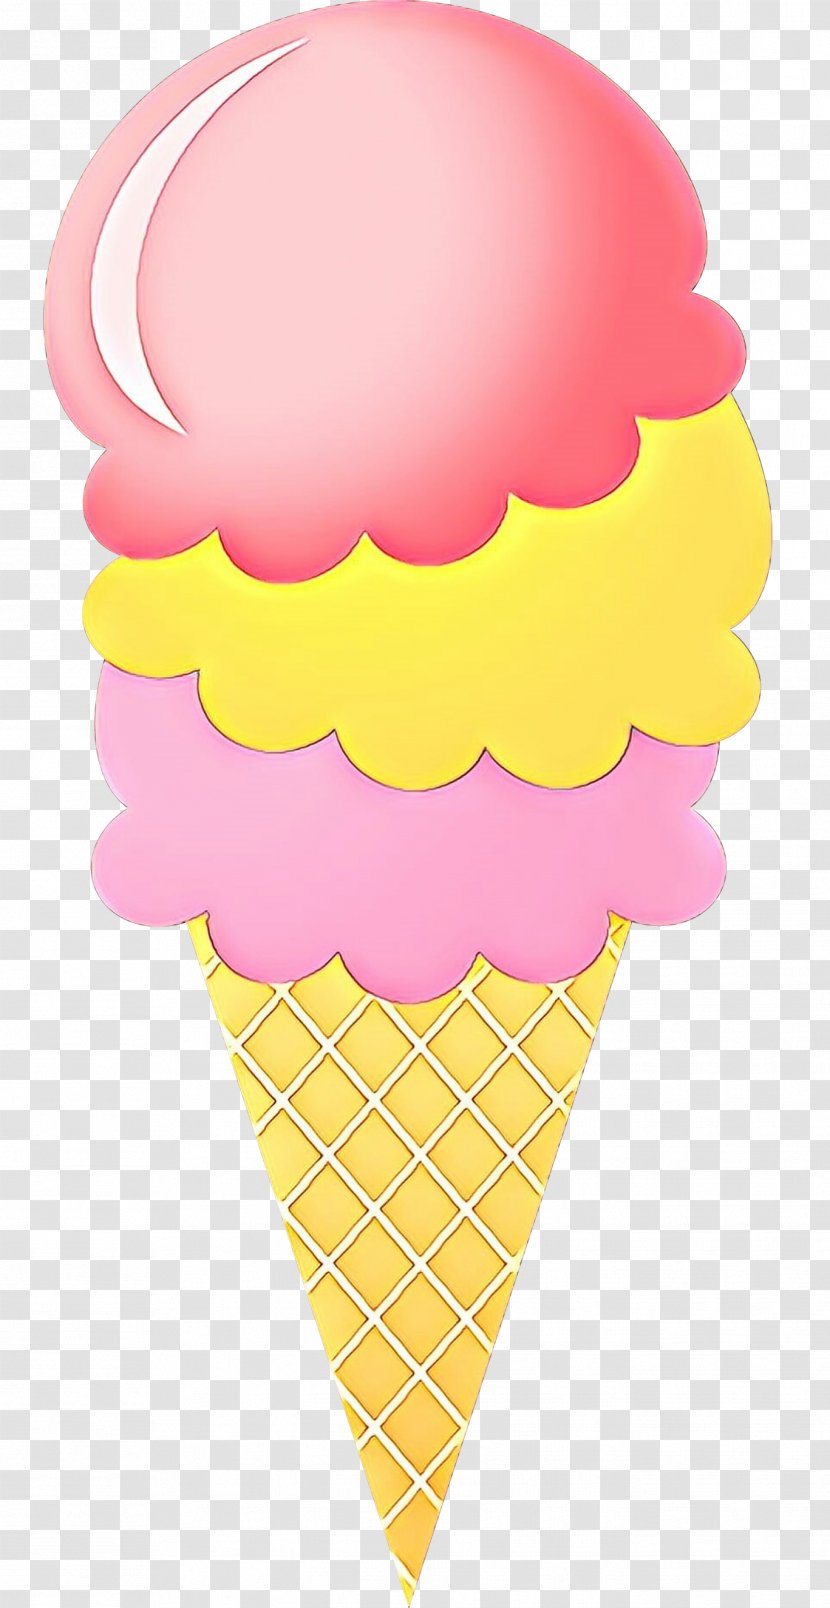 Ice Cream Cone Background - Baking Cup Transparent PNG